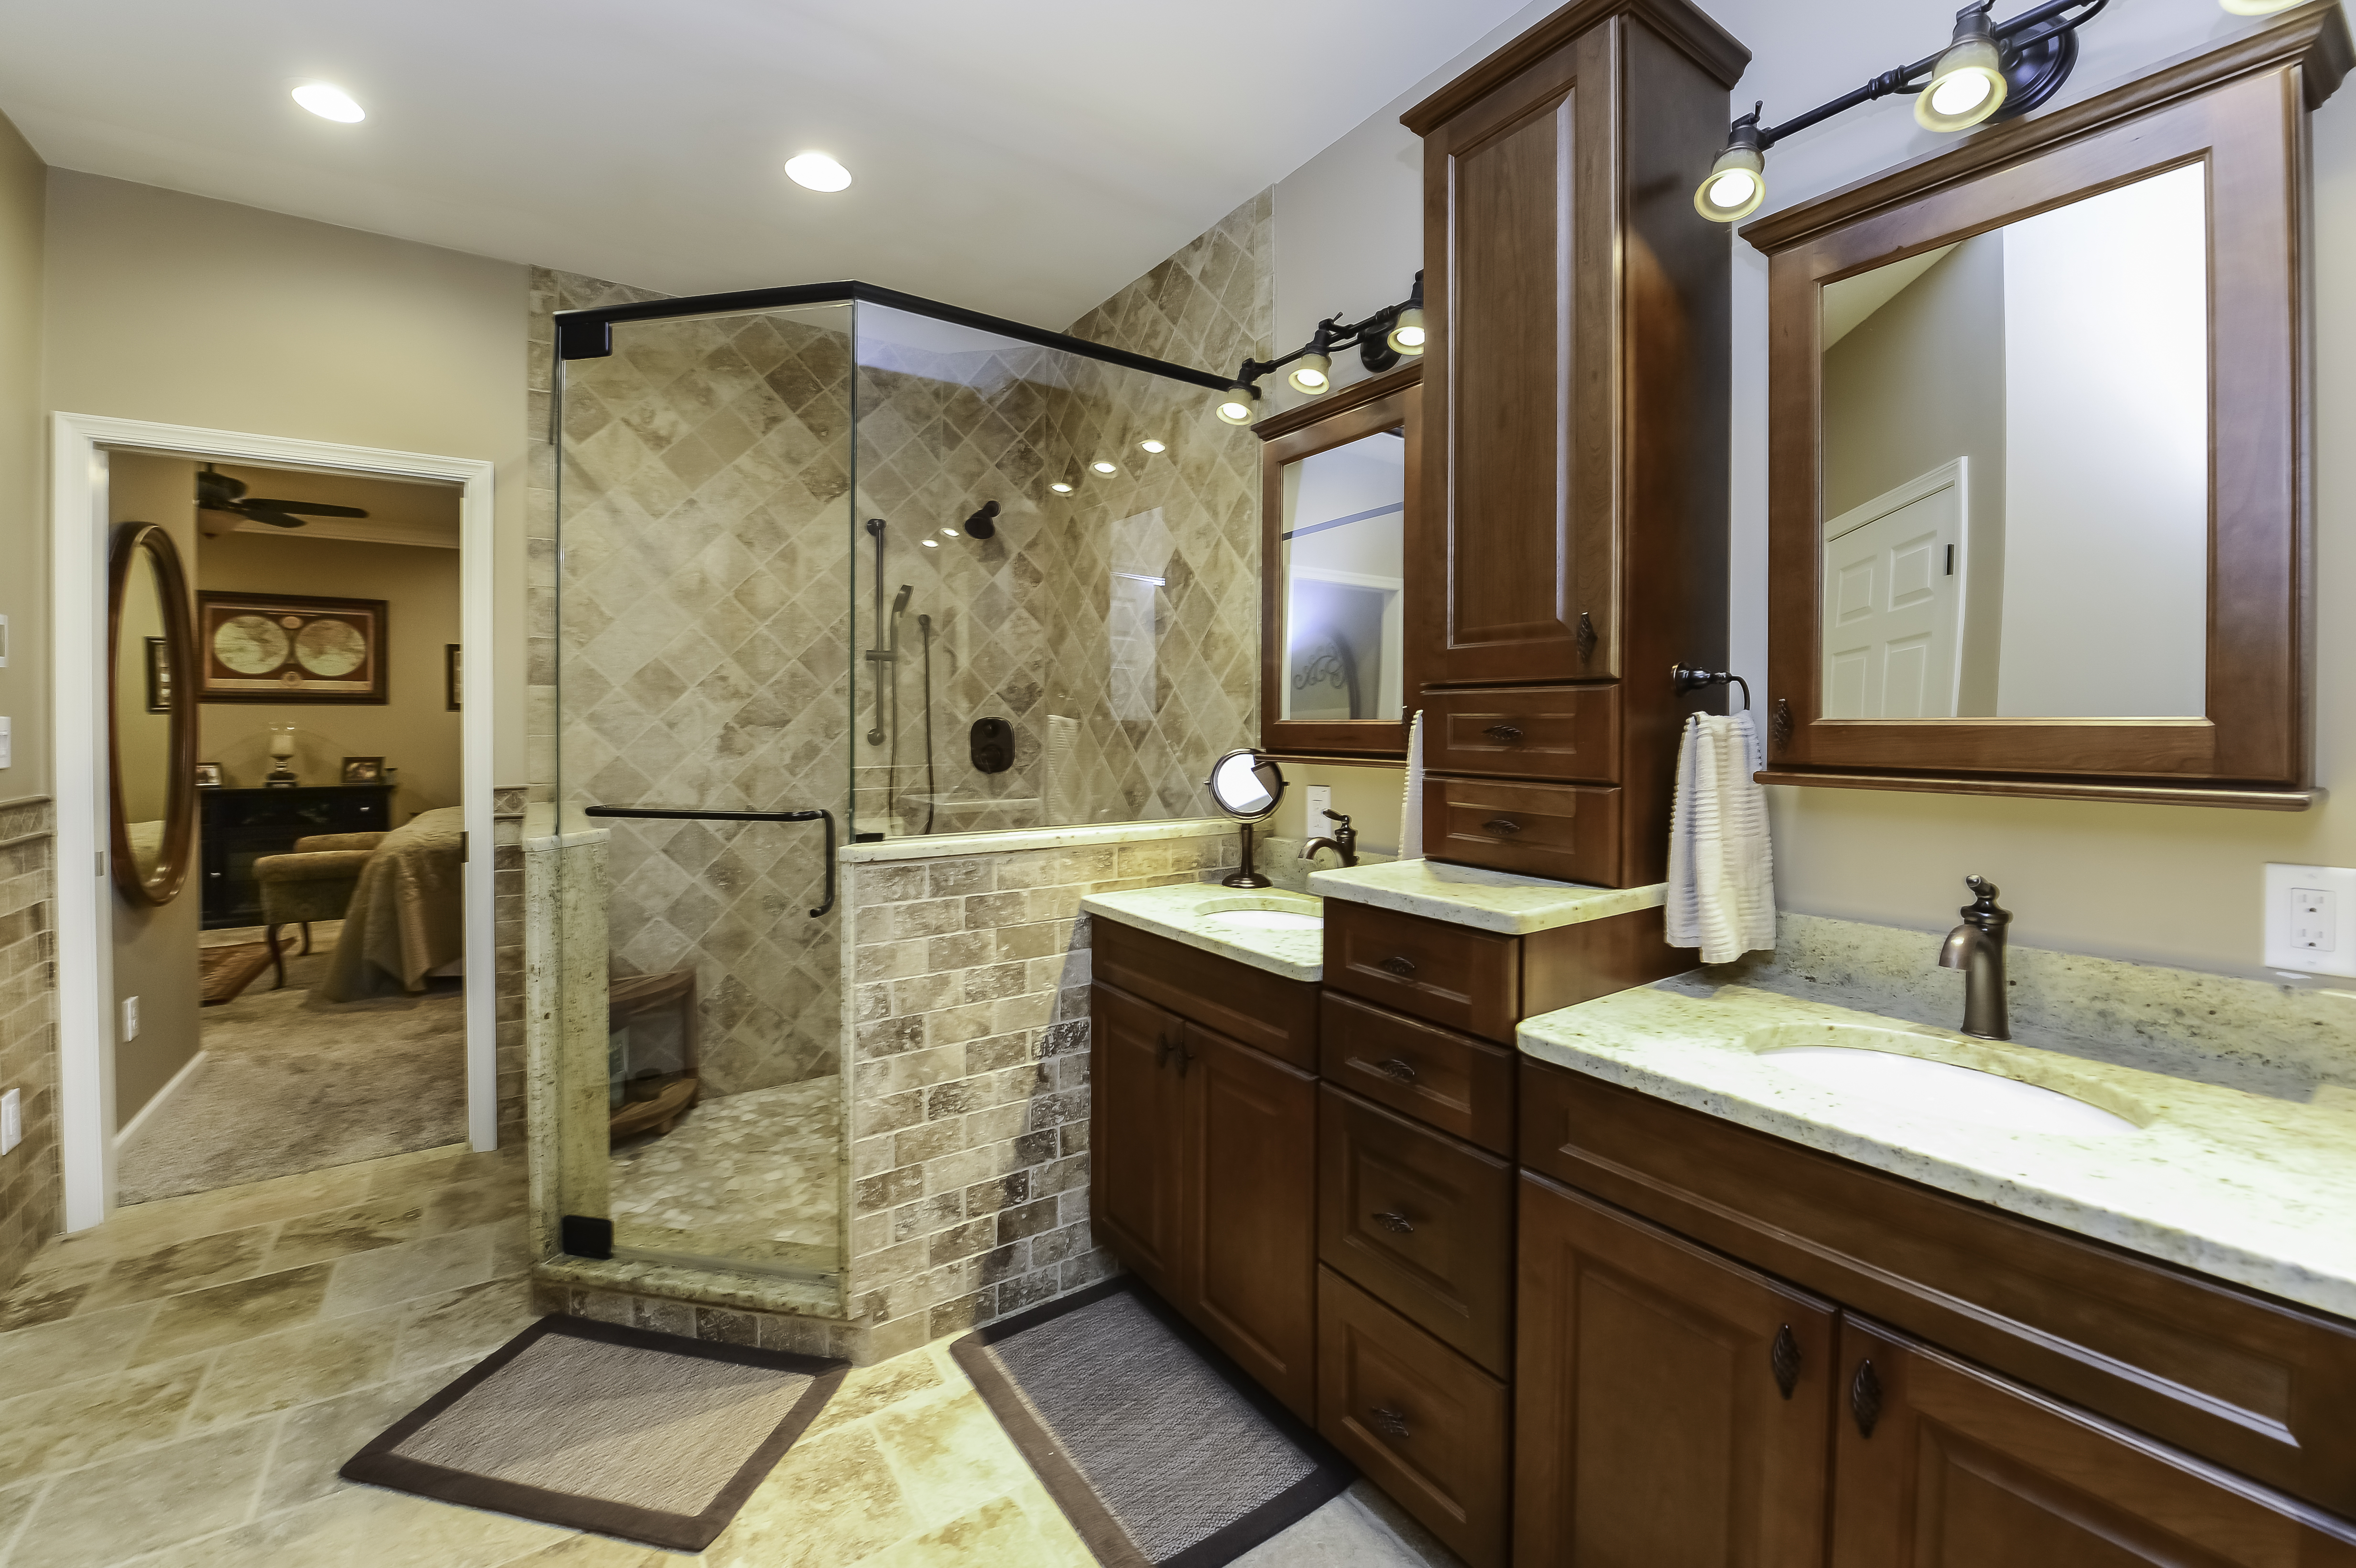 Modern Master Bathroom Ideas To Fuel Your Design Imagination Ayars Complete Home Improvements